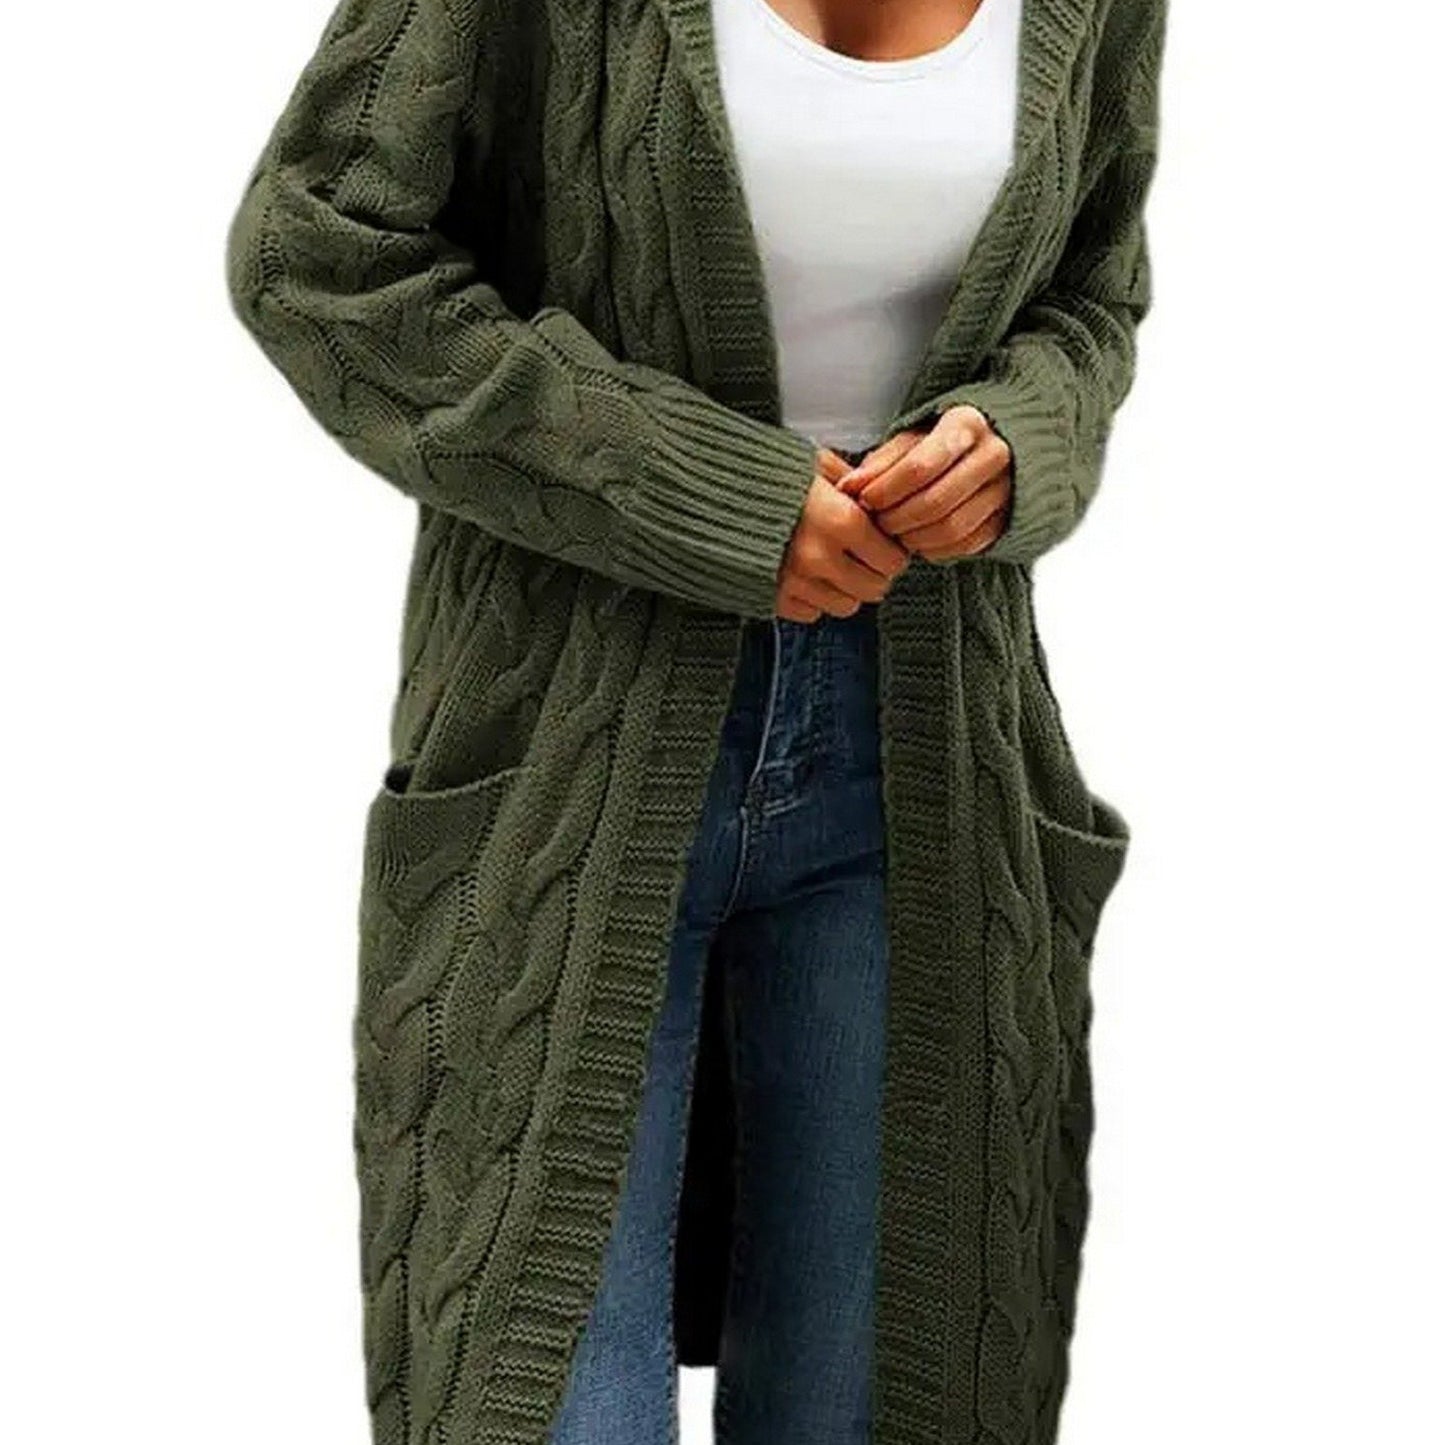 Women's Sweater Hooded Twist Knit Solid Thick Pocket Long Cardigan